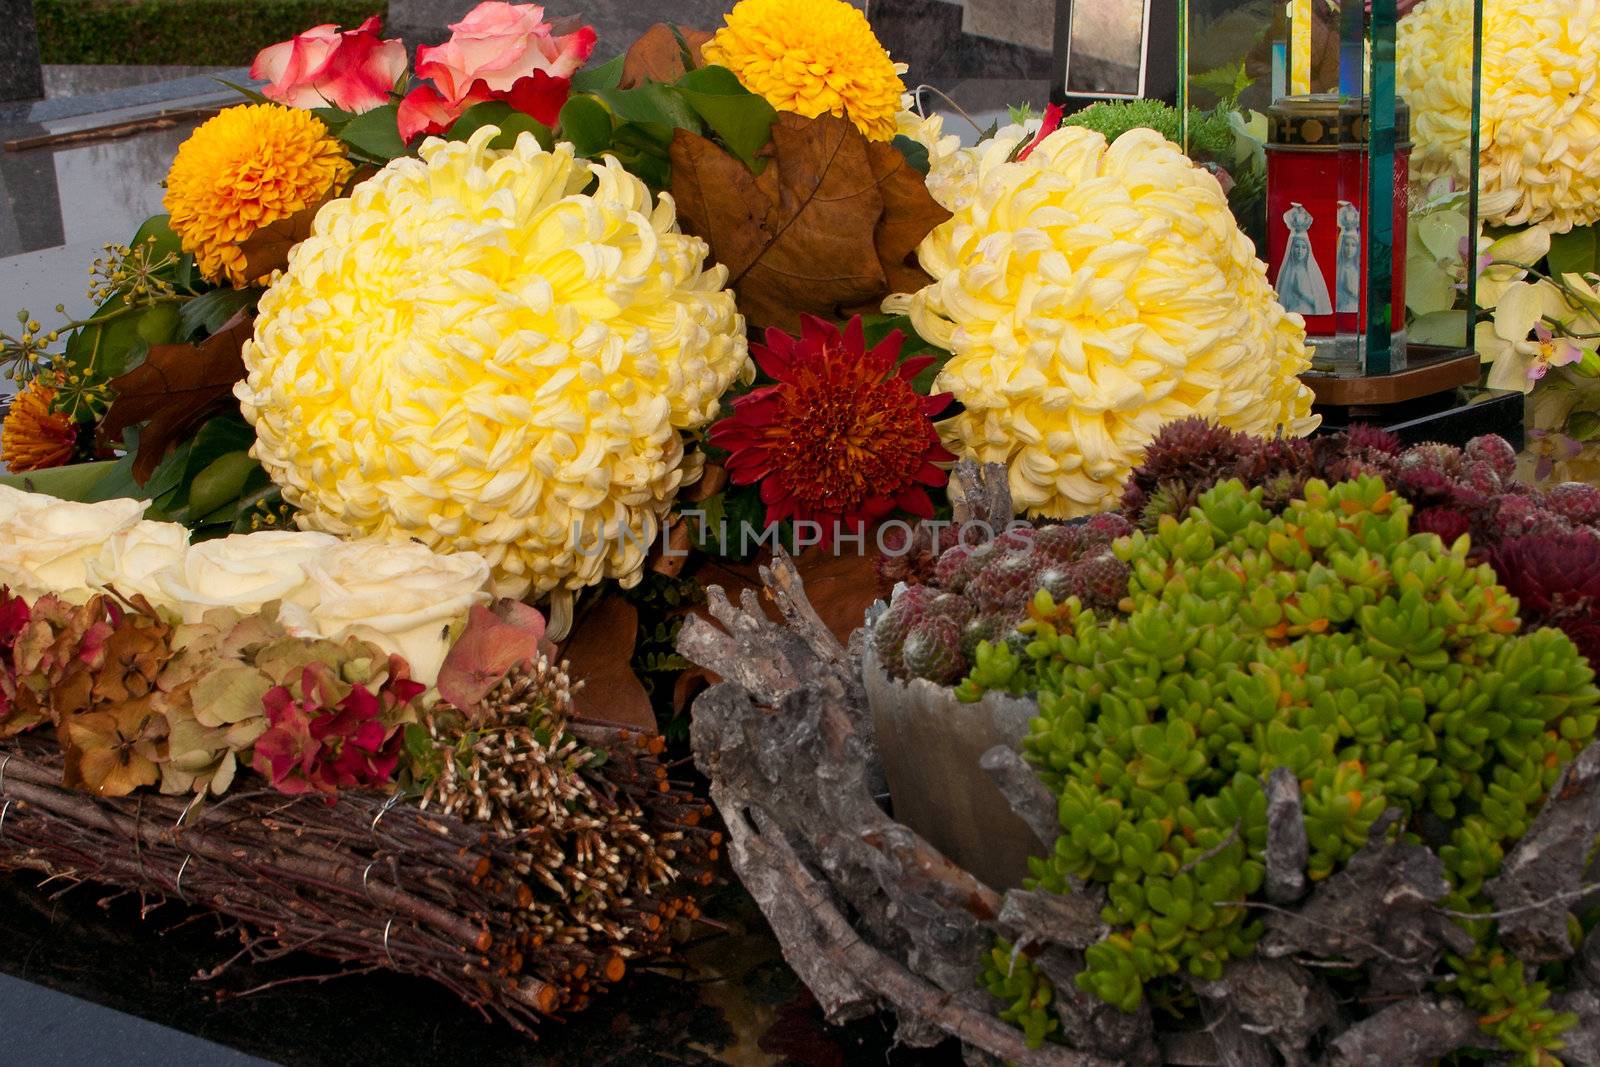 Chrysanthemum on a Graveyard with All Saints Day